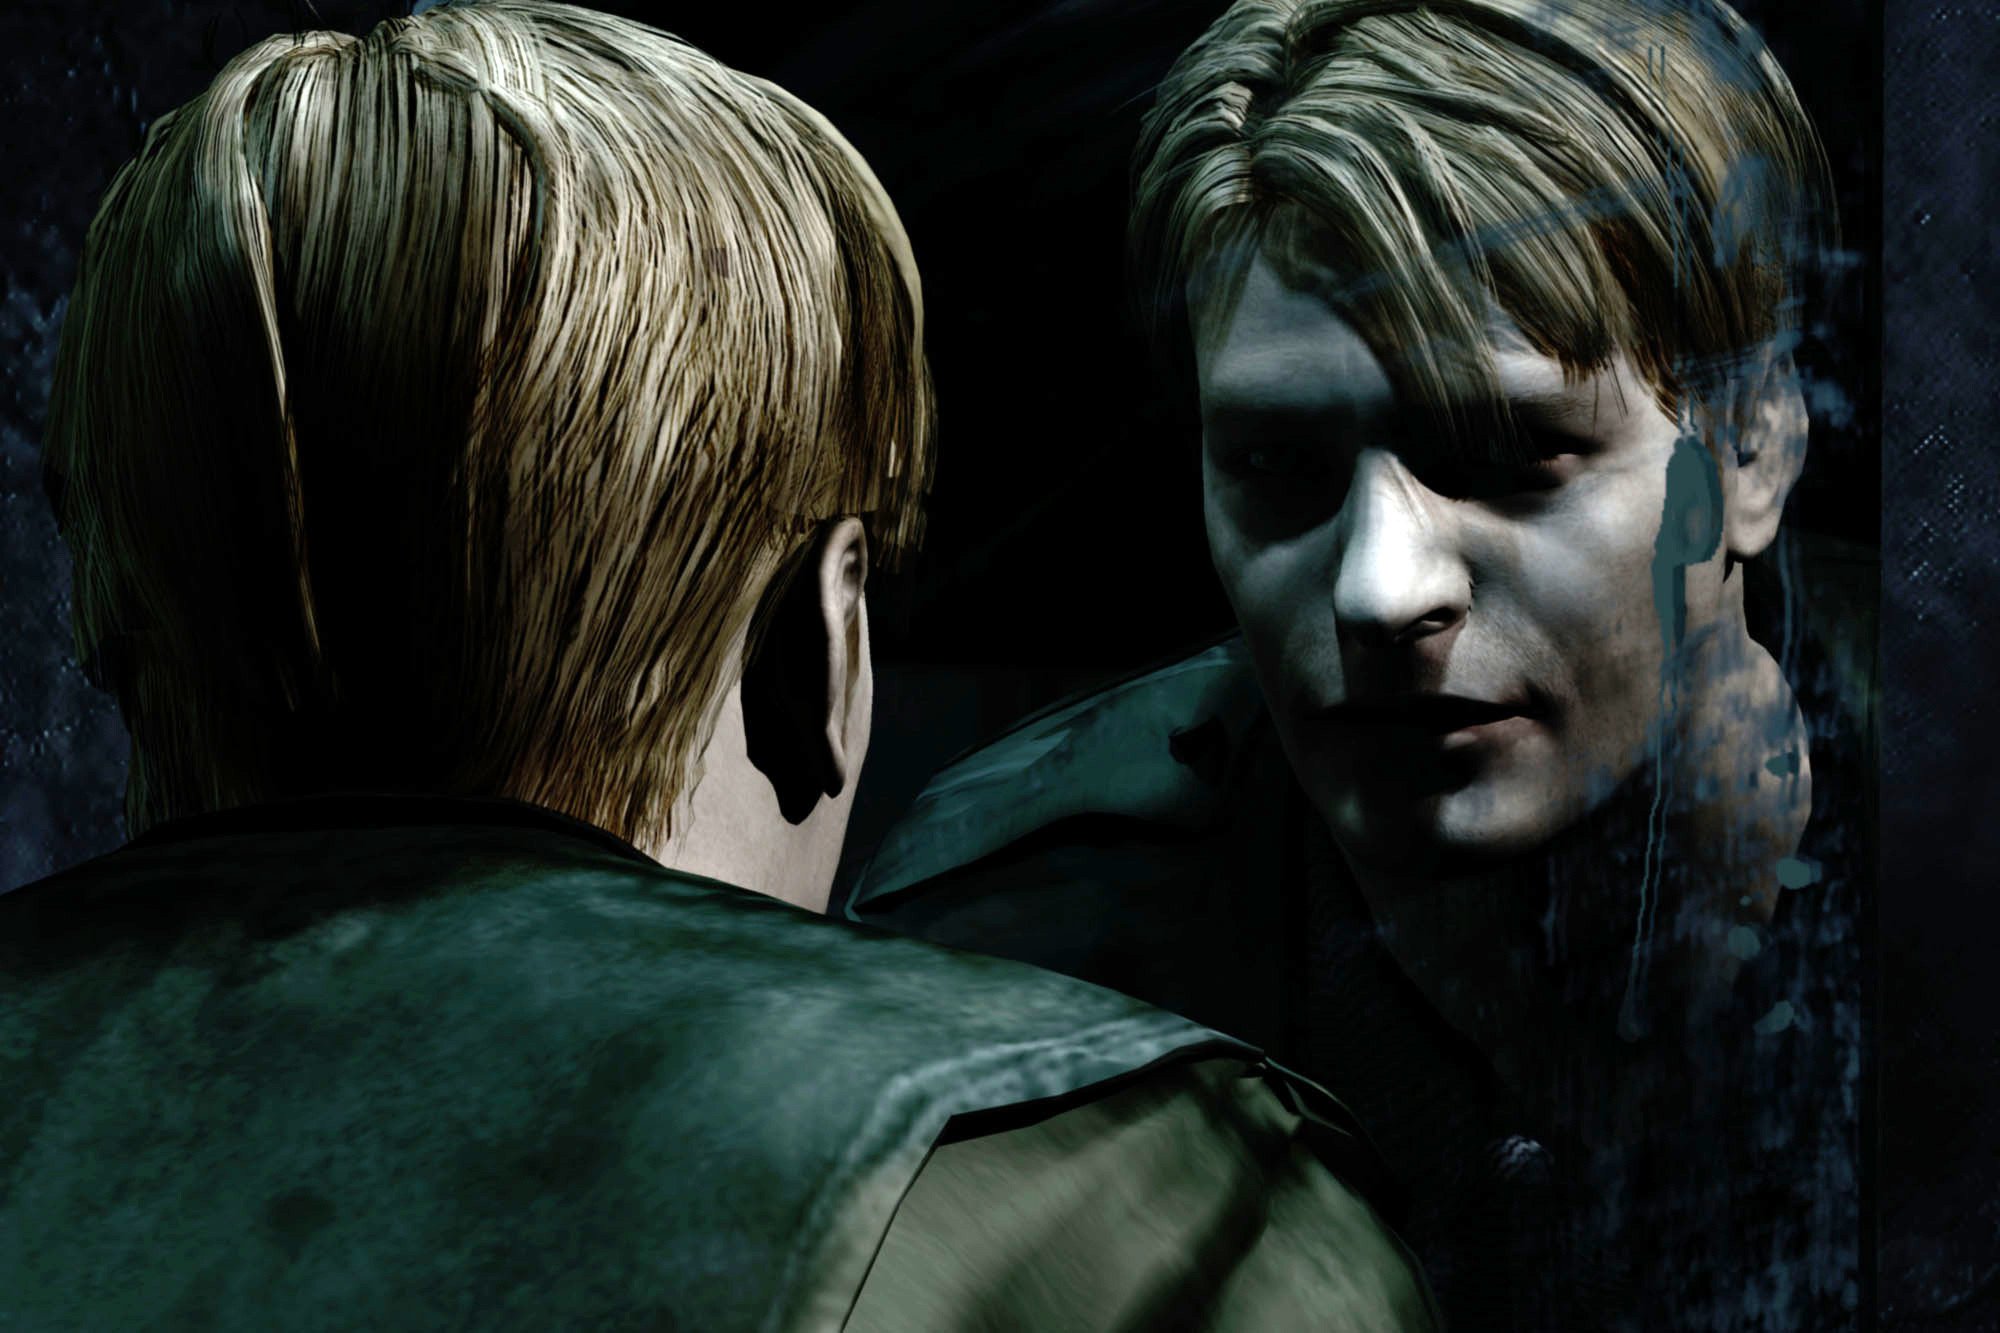 Return to Silent Hill casts its leads, and will start filming next month